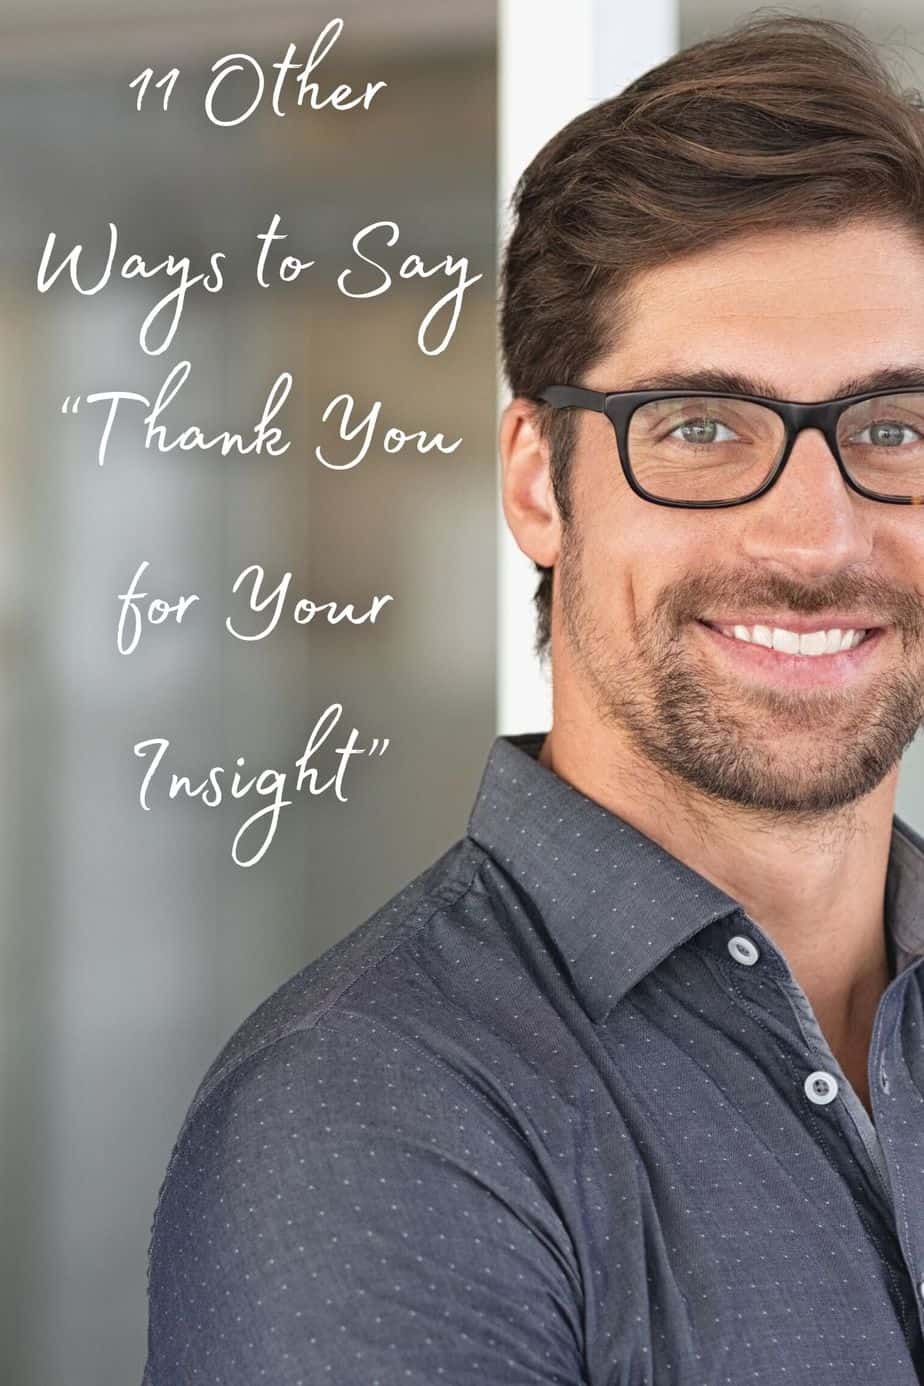 11 Other Ways to Say “Thank You for Your Insight” Pin